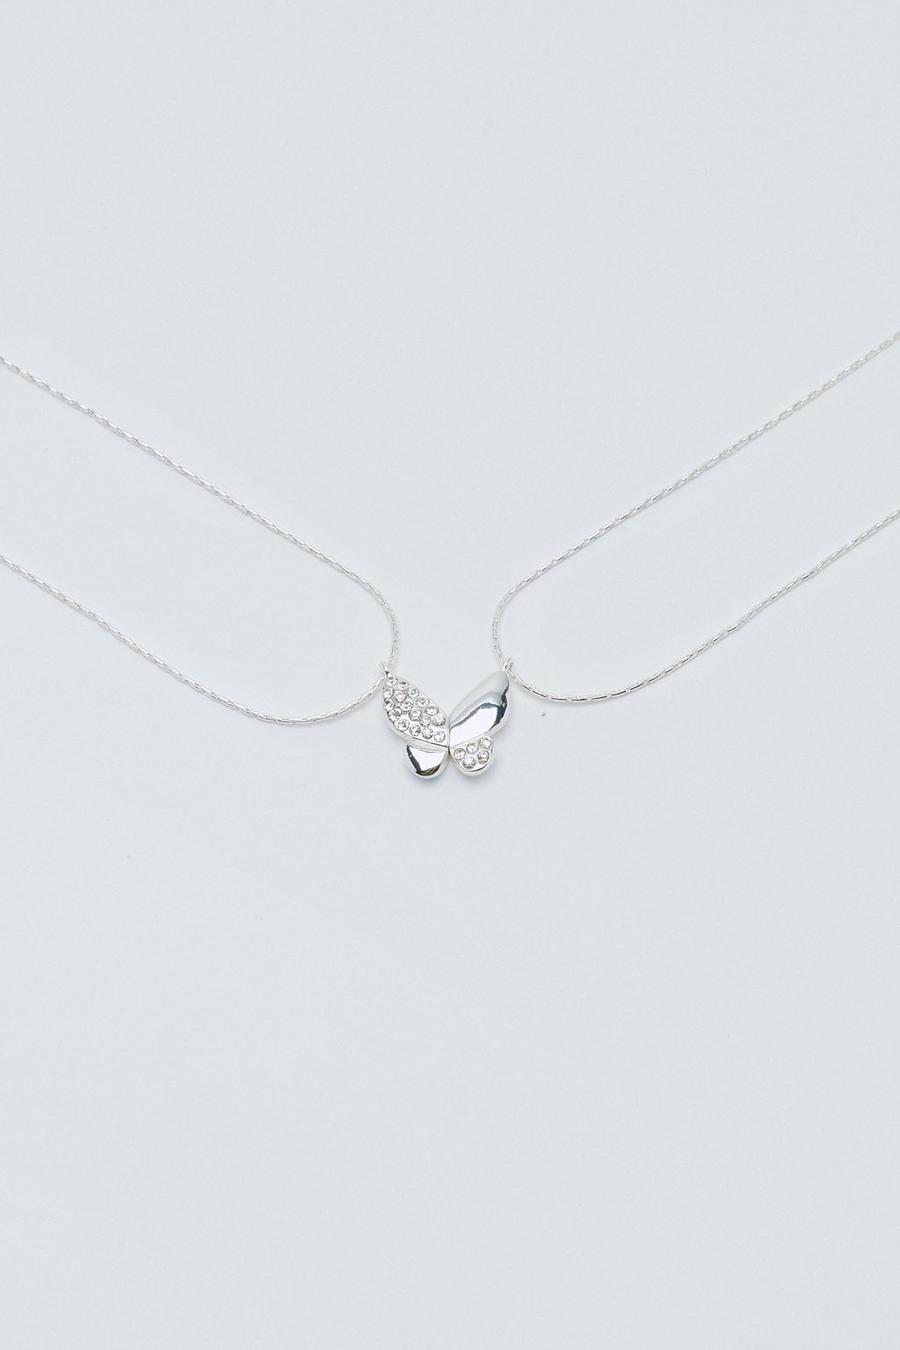 Recycled Silver Plated Butterfly Friendship Necklace